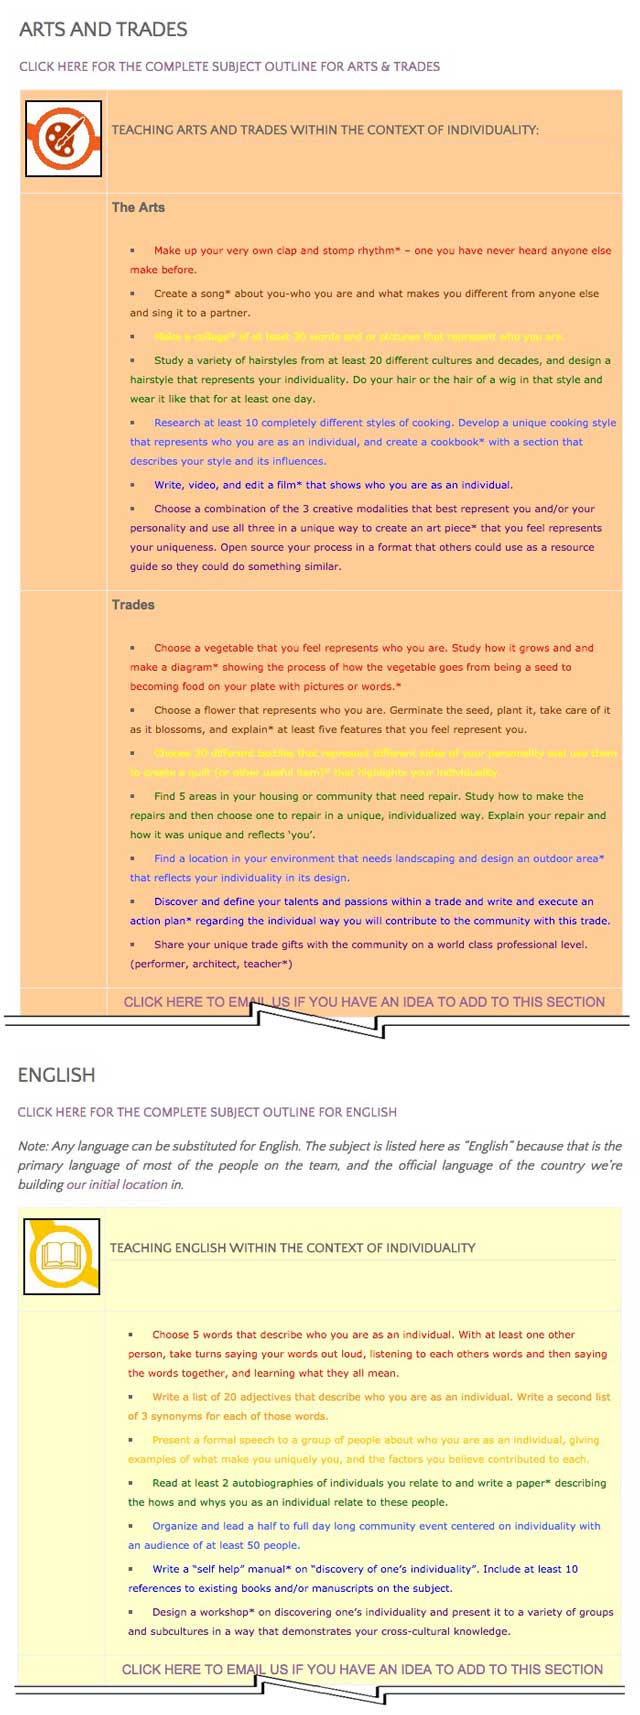 This last week the core team transferred the first 25% of the written content for the Individuality Lesson Plan to the website, as you see here. This lesson plan is purposed to teach all subjects, to all learning levels, in any learning environment, using the central theme of “Individuality”.